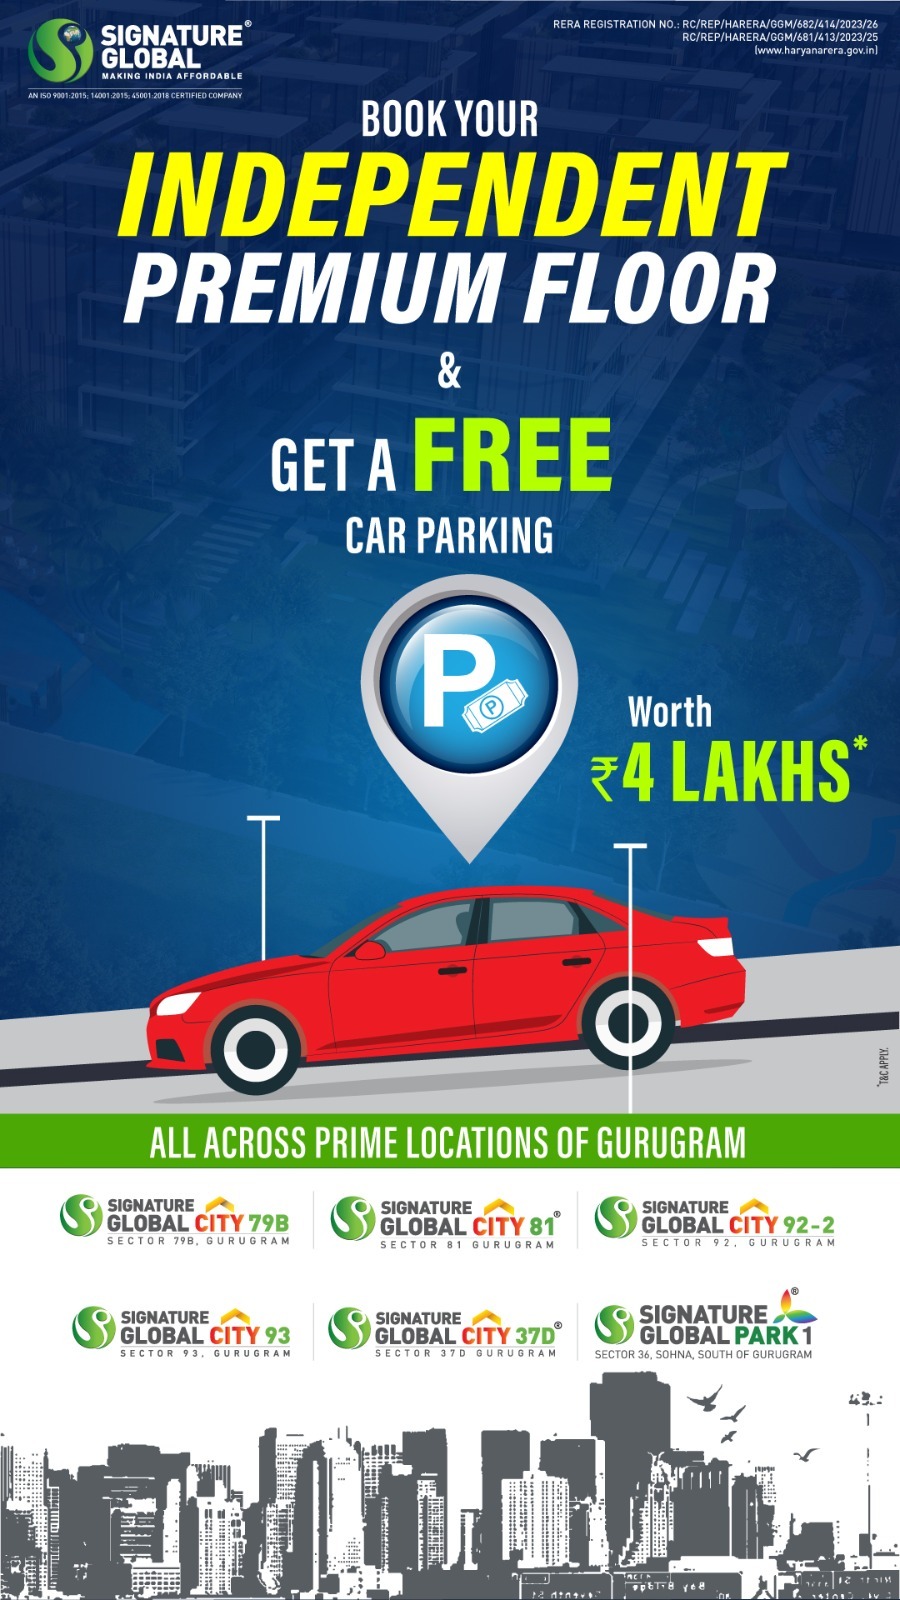 Book your independent premium floor and get a free car parking at Signature Global in Gurgaon Update